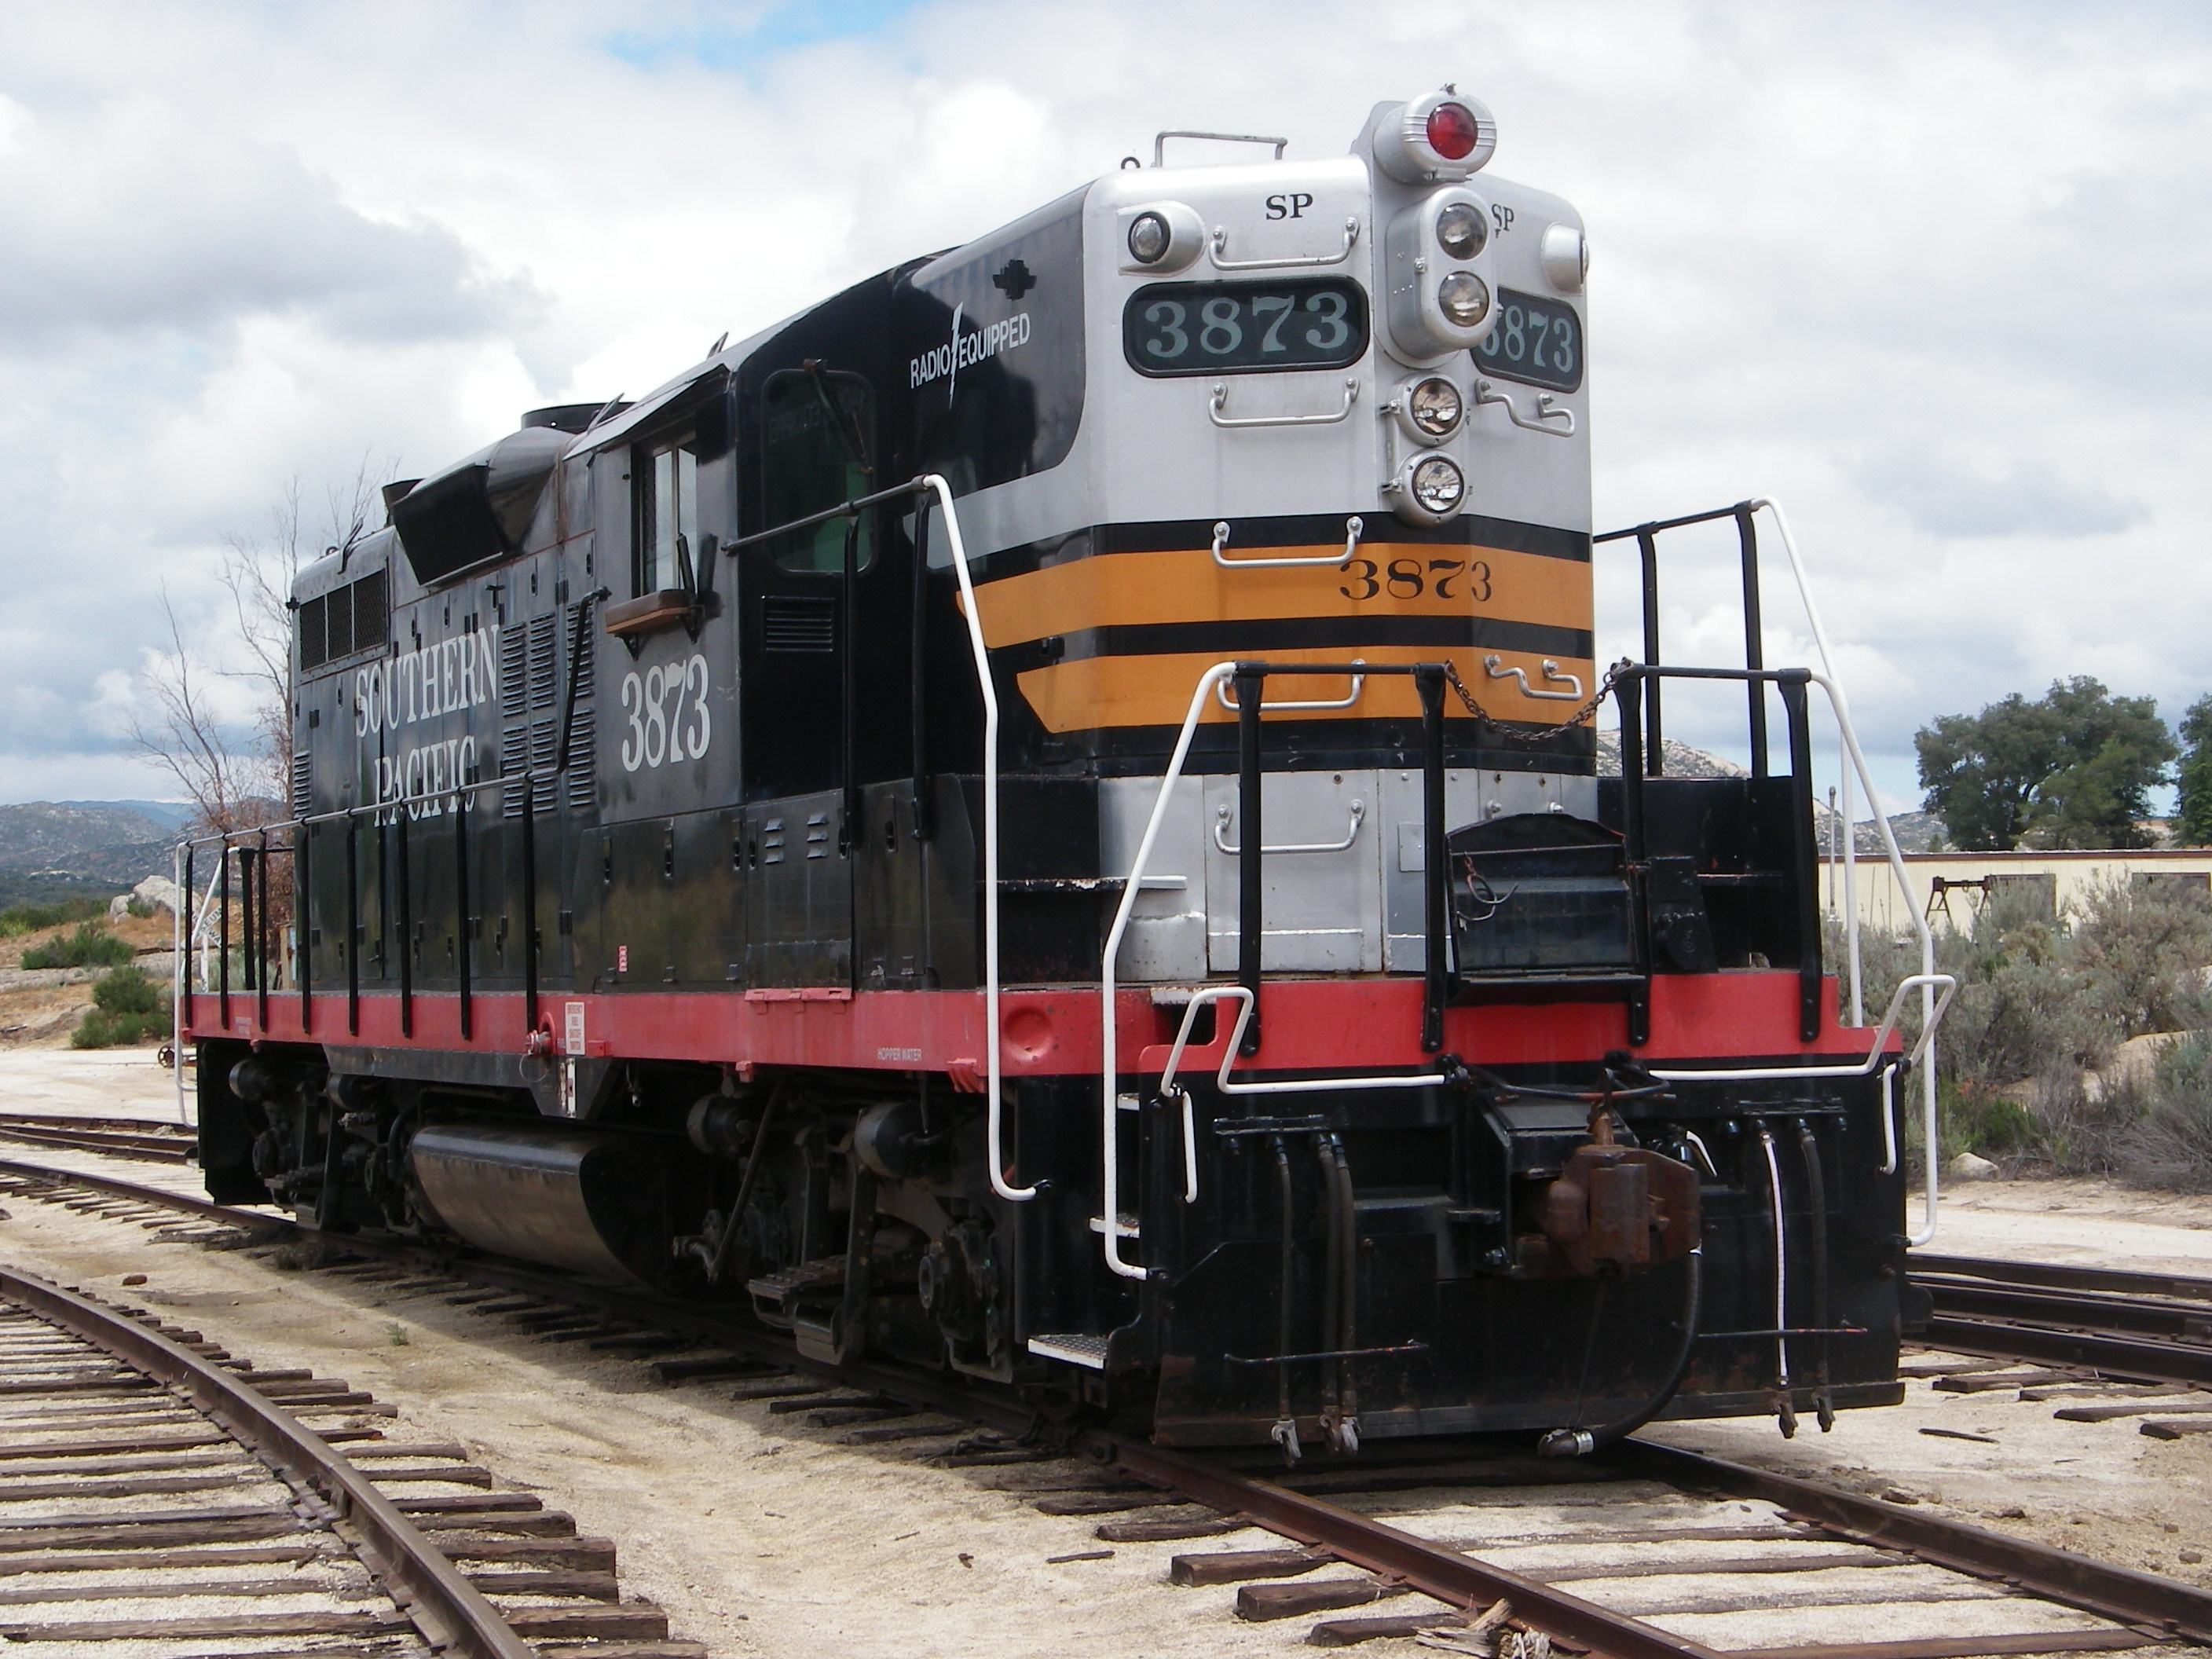 Southern Pacific #3873 – Pacific Southwest Railway Museum